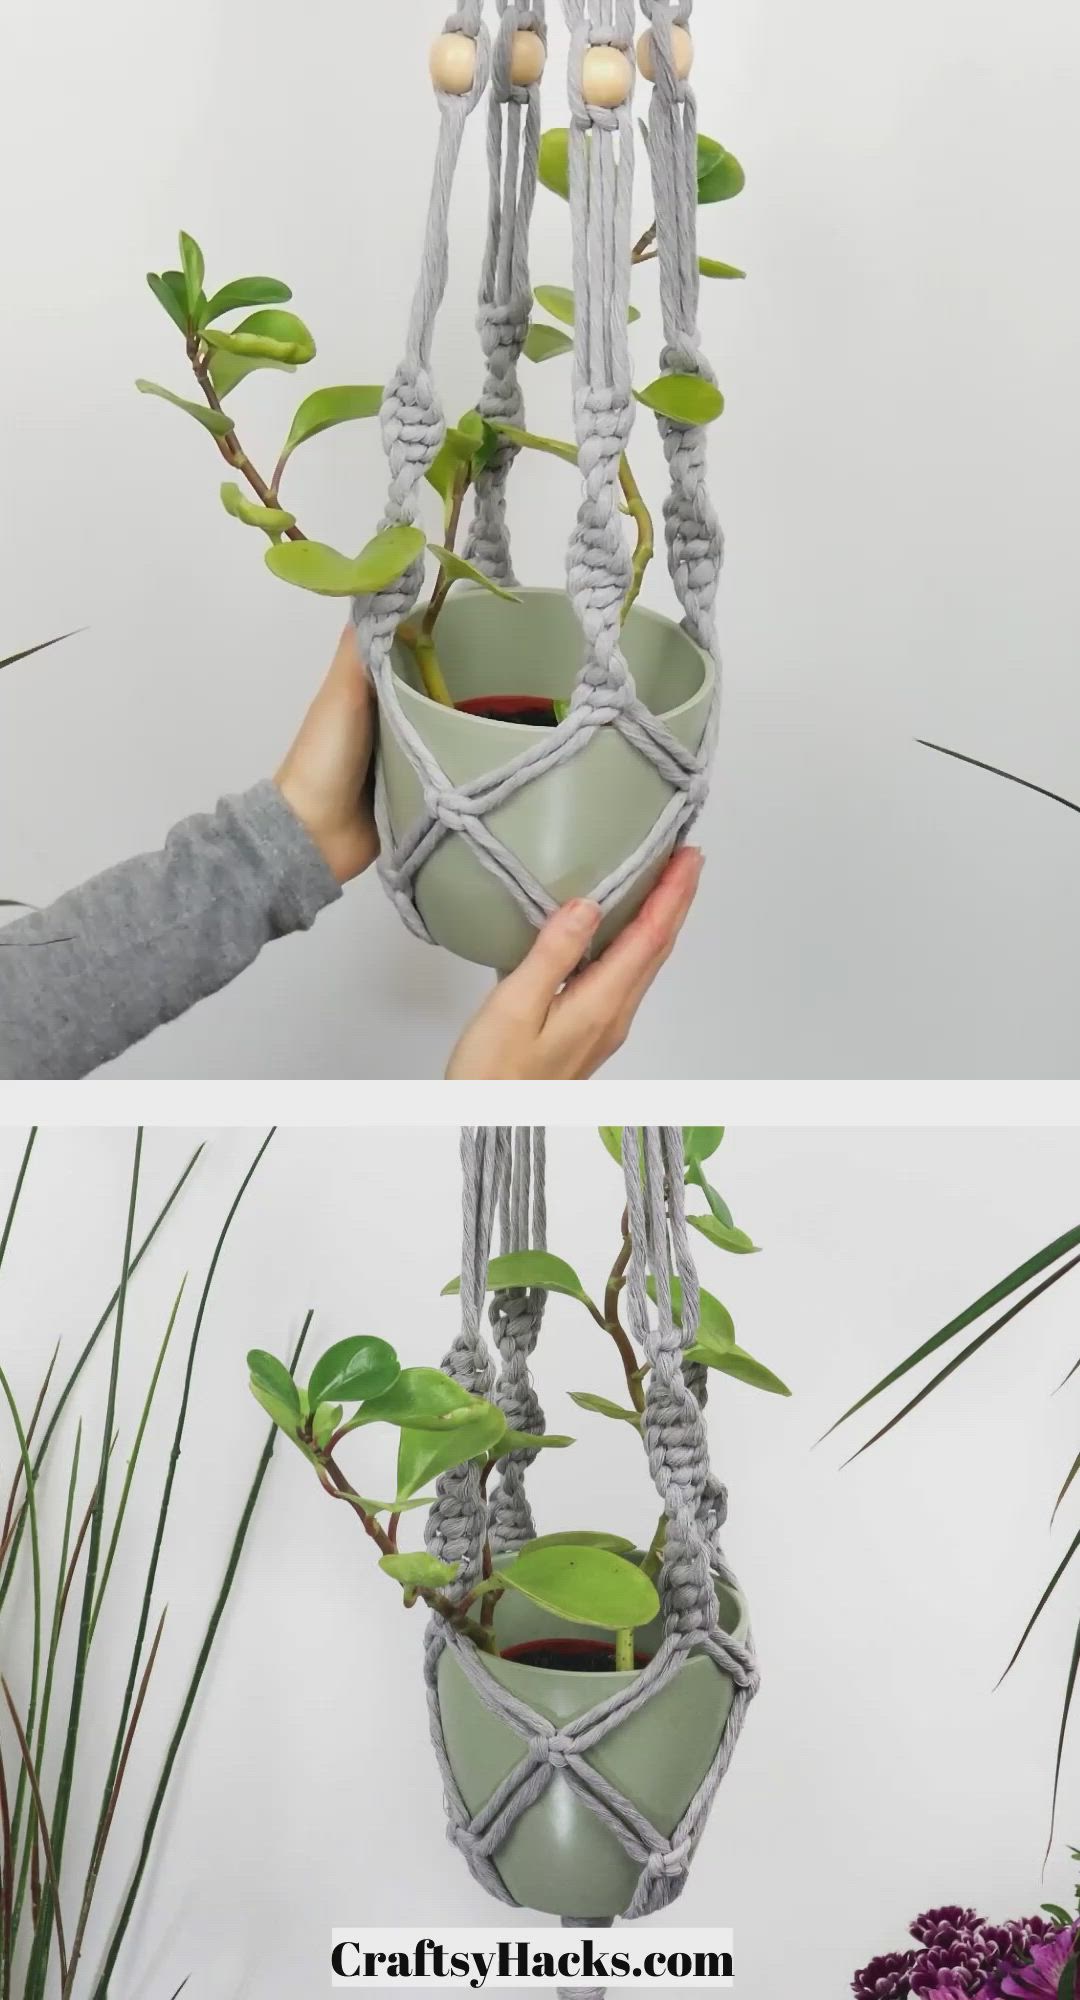 This contains: DIY Macrame Plant Hanger